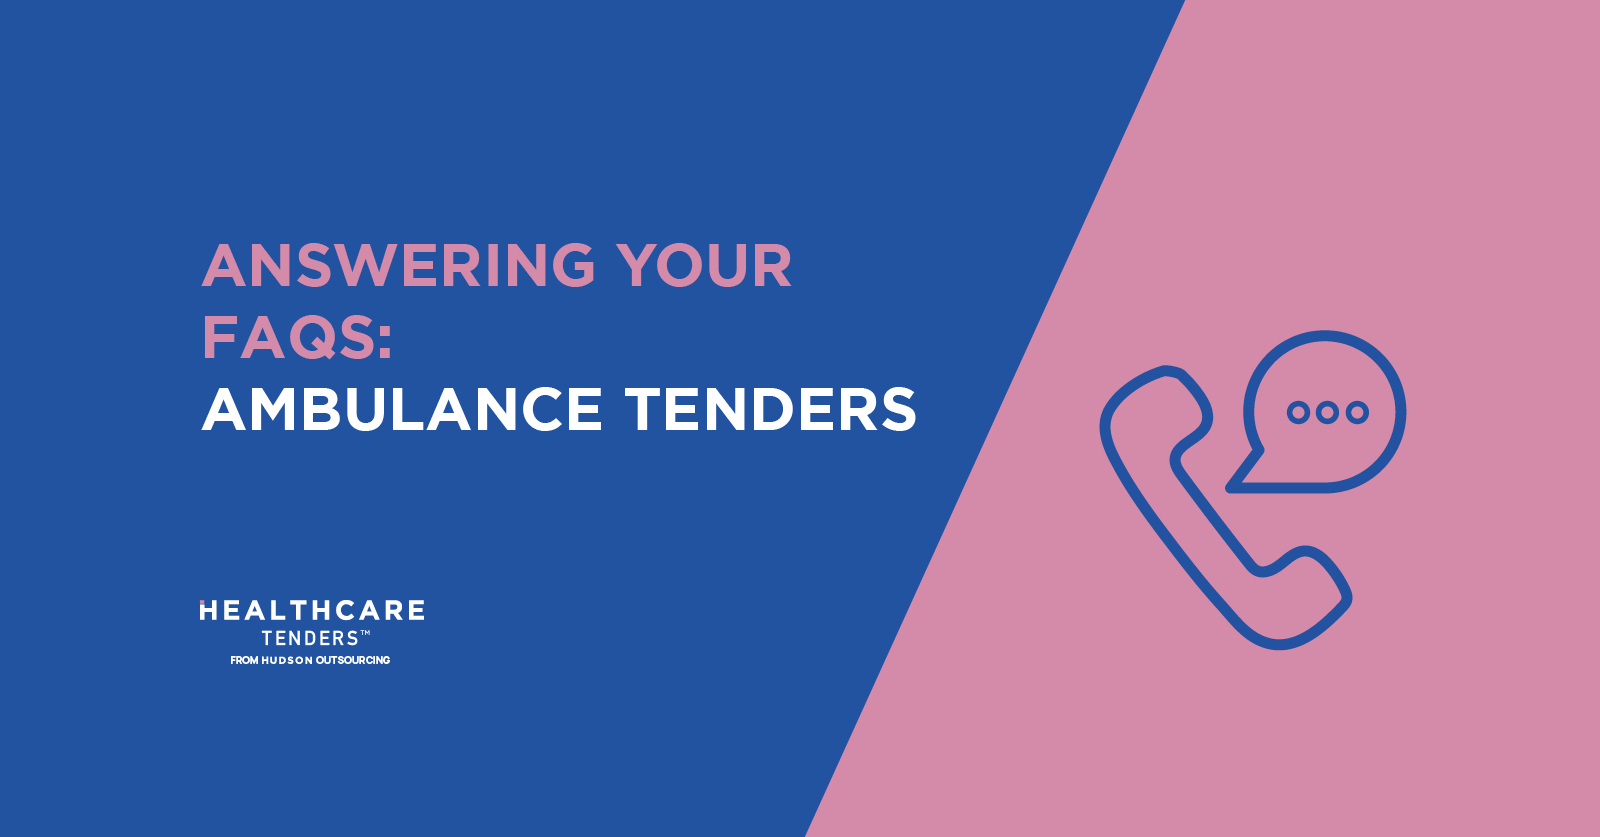 3 Things to Consider When Writing Your Ambulance Tender Response